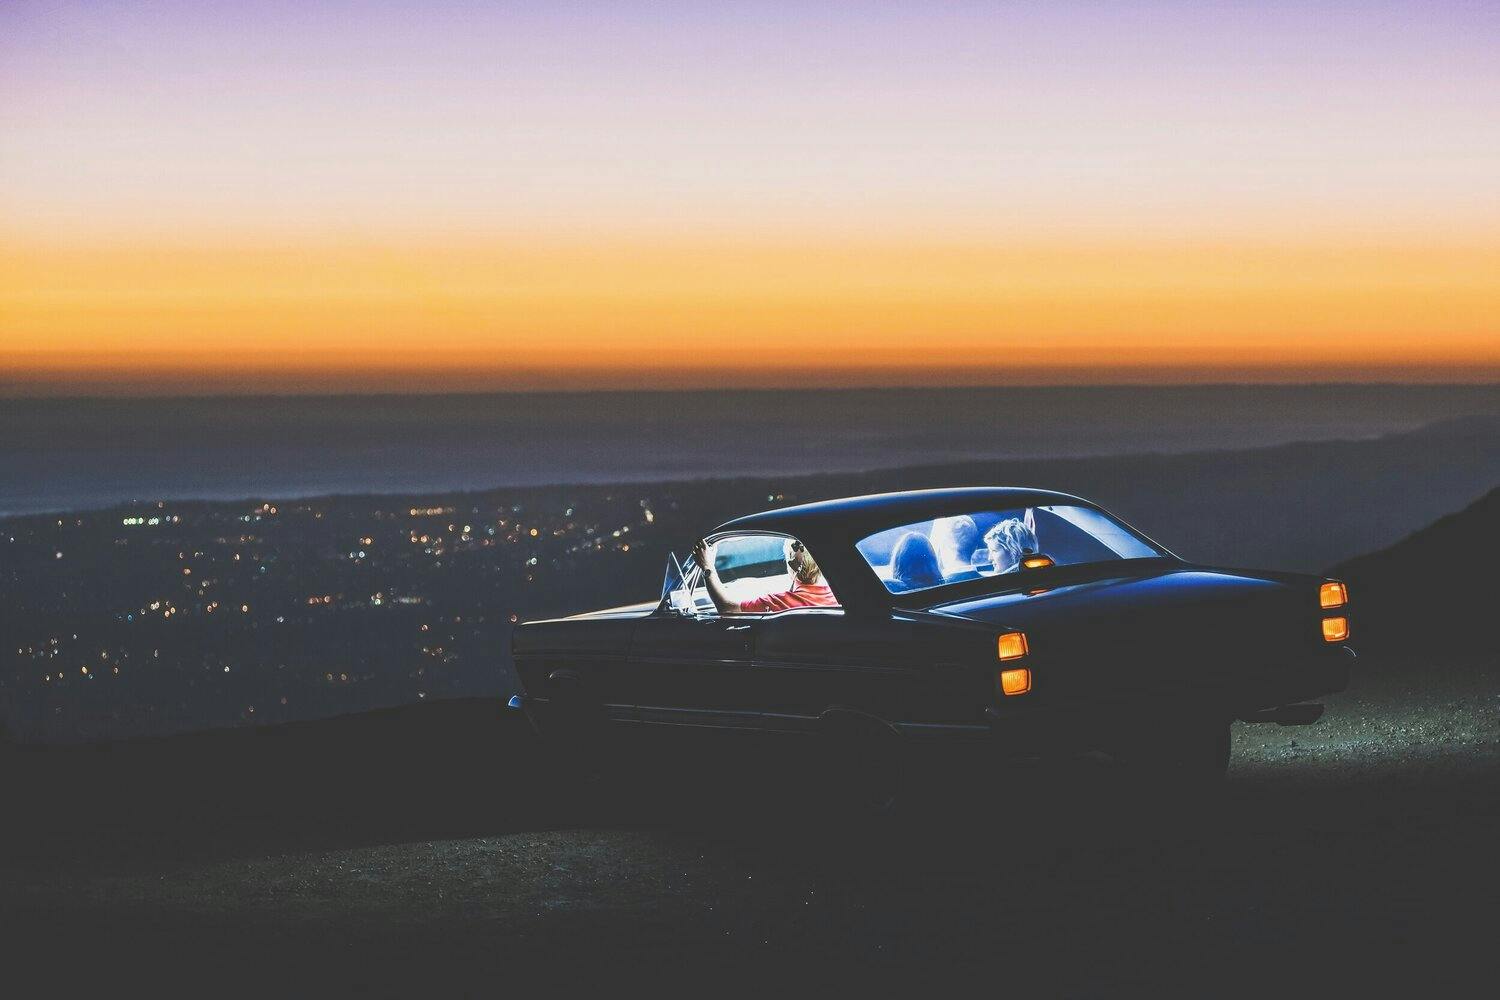 4 people sitting inside a car from a scenic point overlooking the city during sunset.